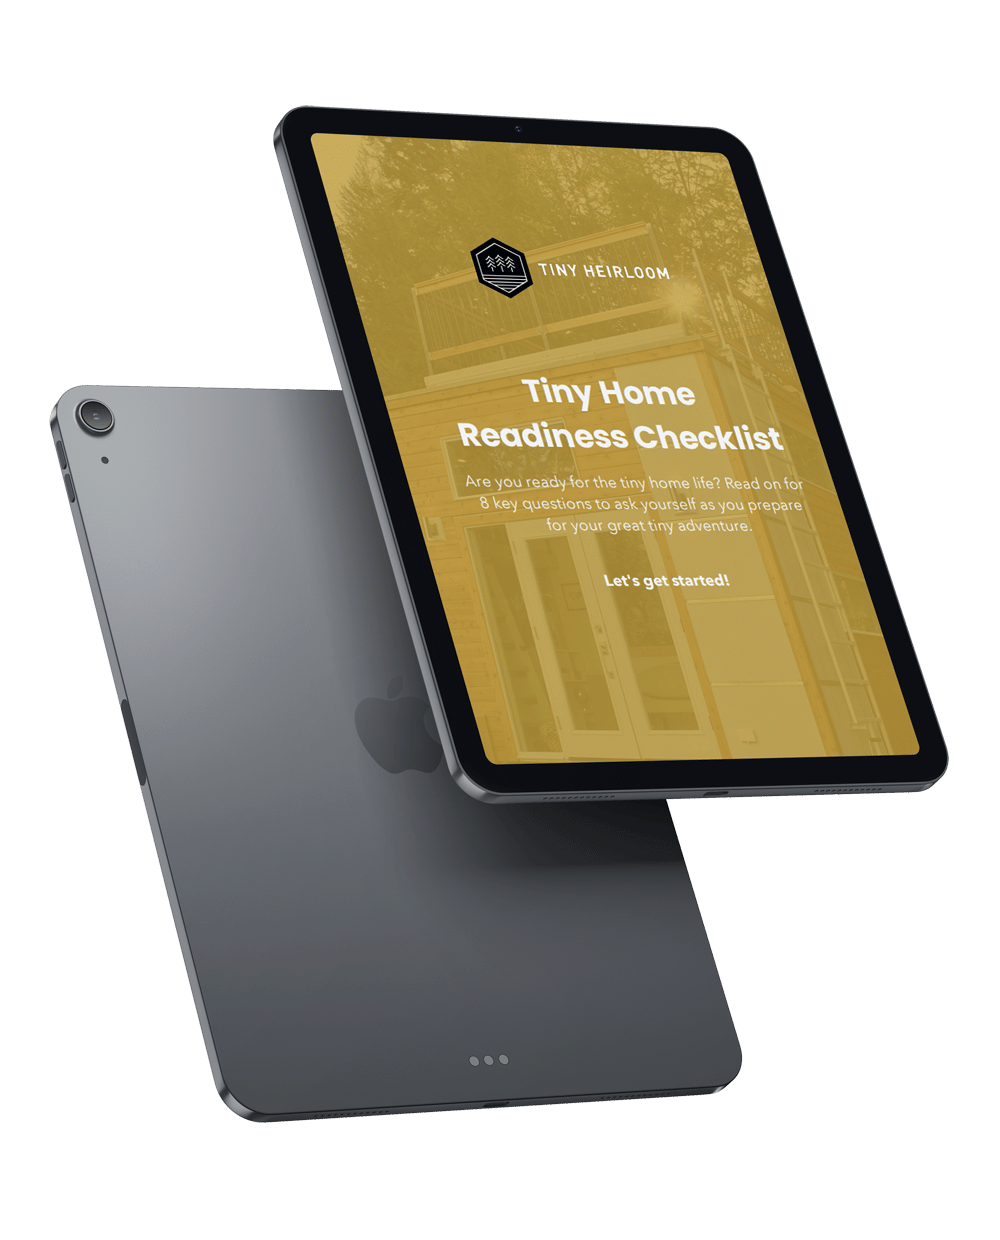 Tablet showing the TIny Home Readiness Checklist you can request from this page